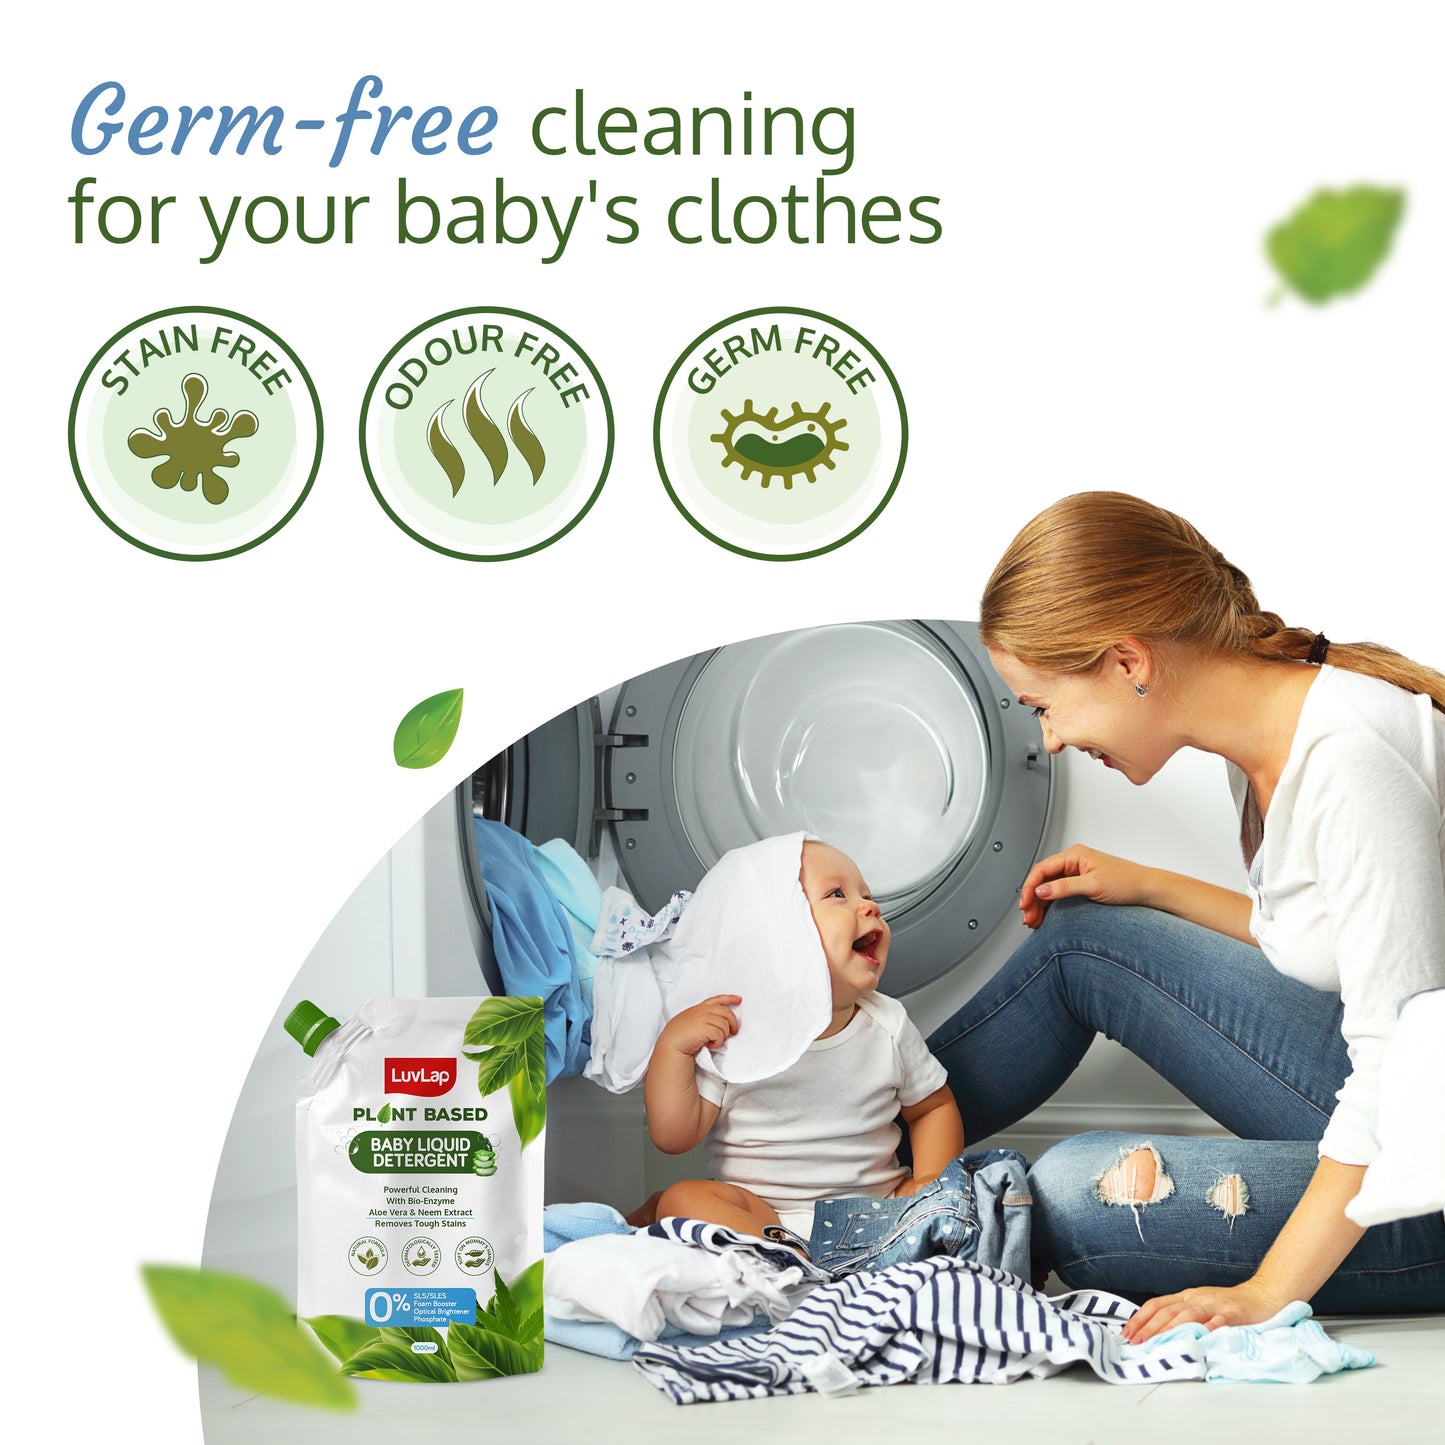 Plant Based Baby Laundry Detergent, Refill pack- 1000ml, With Bio-Enzymes, Aloe Vera & Neem, Dermatologically Tested, Free From SLS/SLES, Phosphate & Bleach